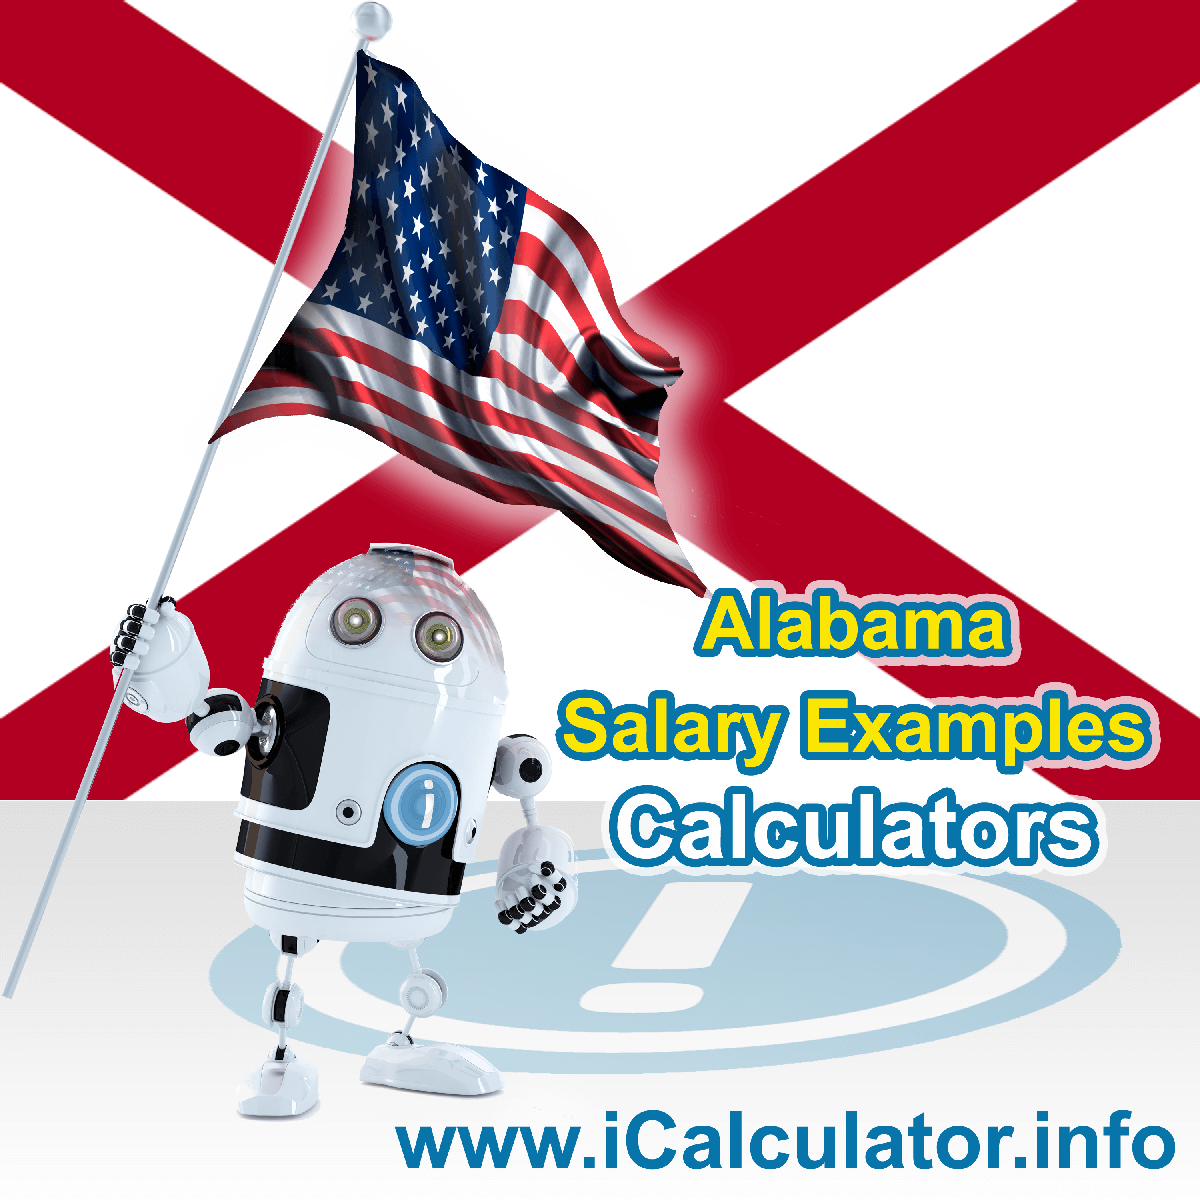 Alabama Salary Example for $ 100,000.00 in 2023 | iCalculator™ | $ 100,000.00 salary example for employee and employer paying Alabama State tincome taxes. Detailed salary after tax calculation including Alabama State Tax, Federal State Tax, Medicare Deductions, Social Security, Capital Gains and other income tax and salary deductions complete with supporting Alabama state tax tables 